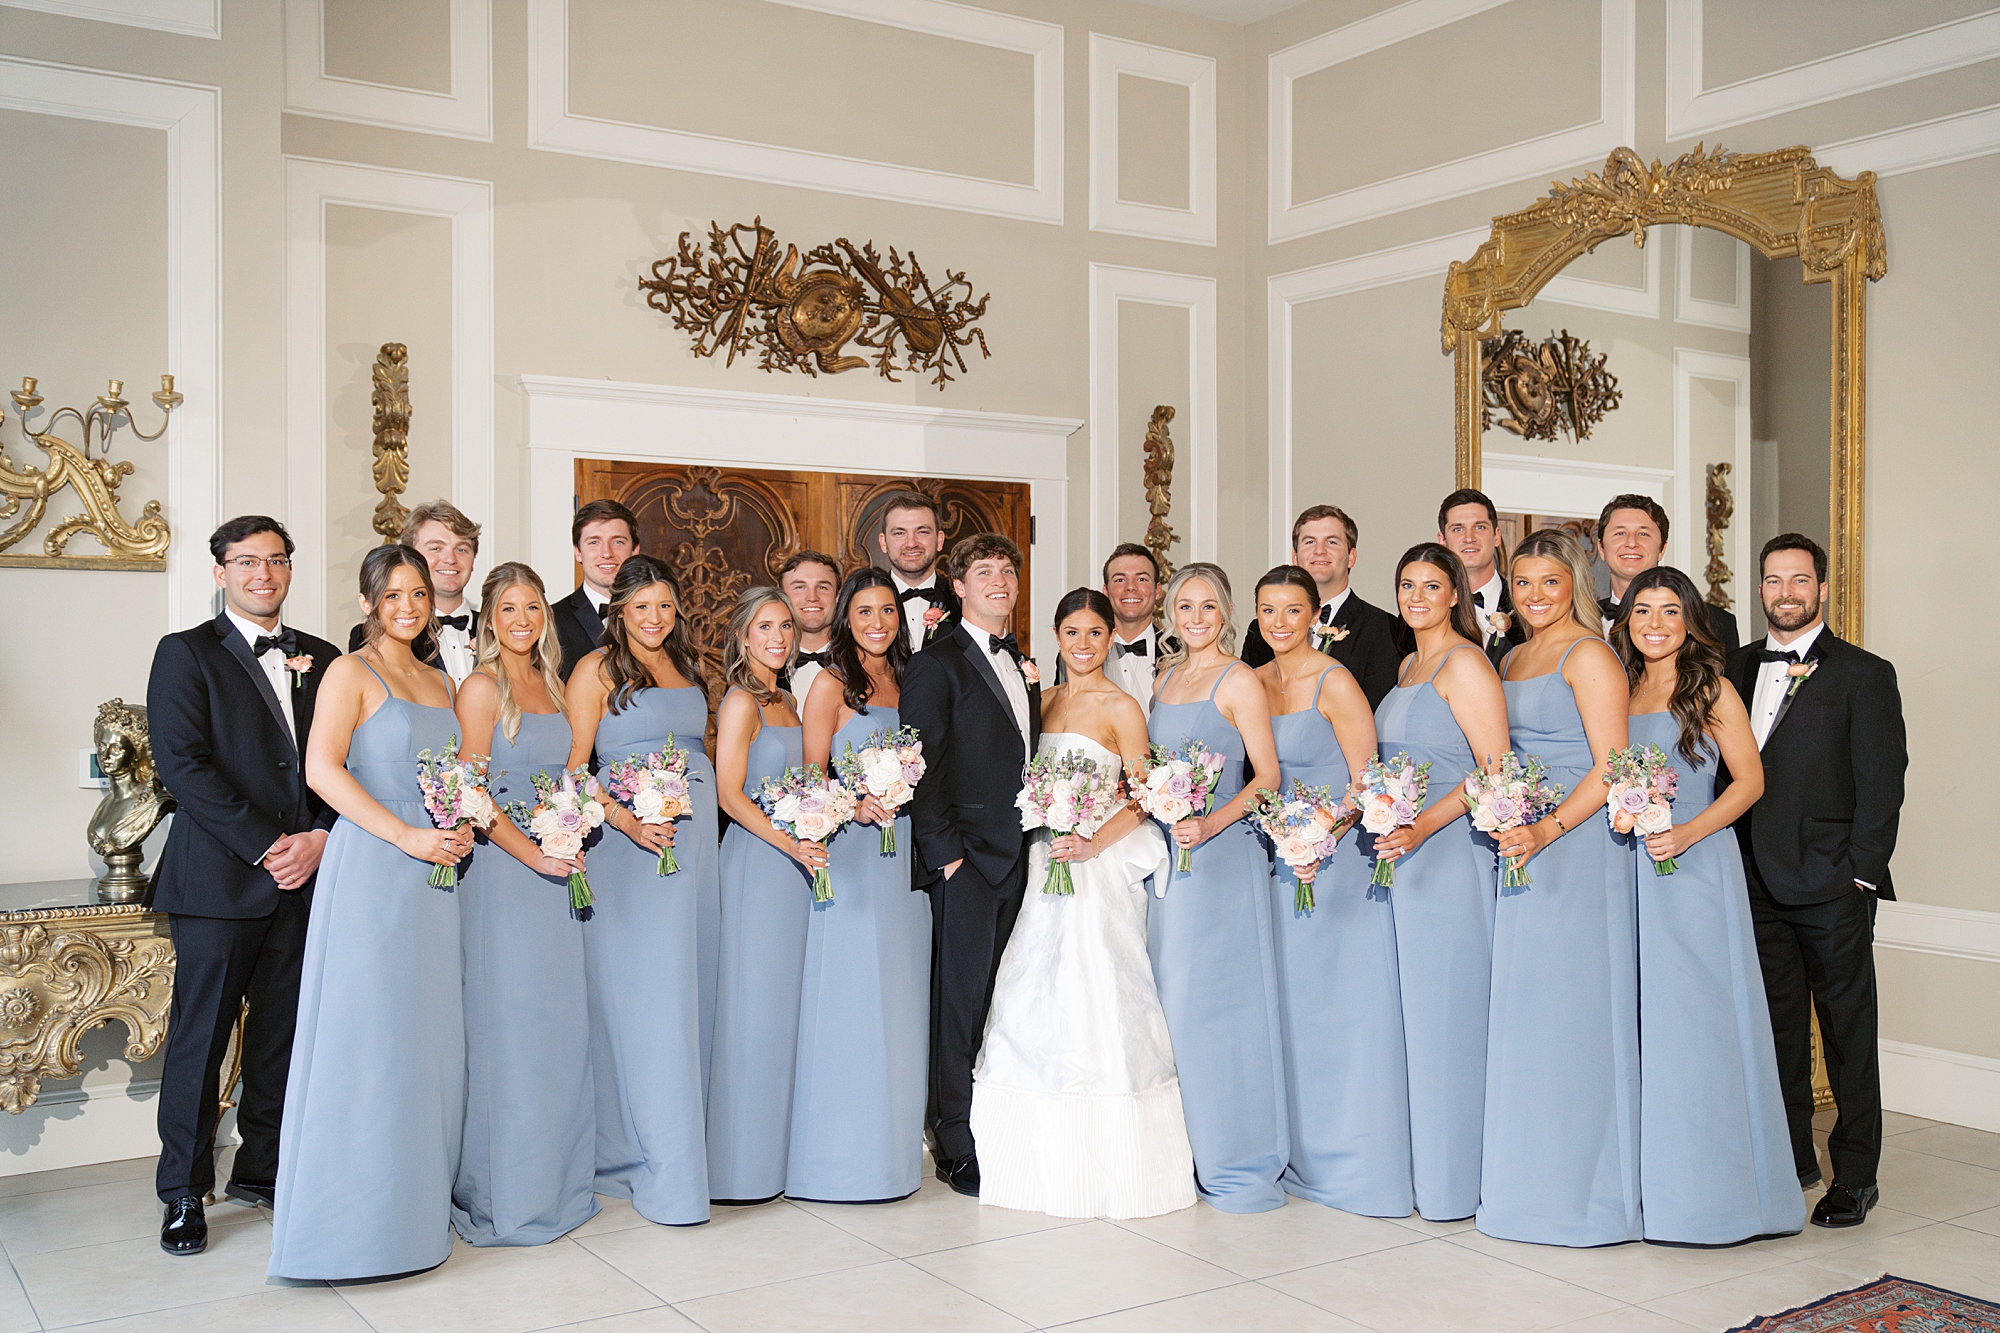 newlyweds pose with wedding party in blue dresses and black suits 